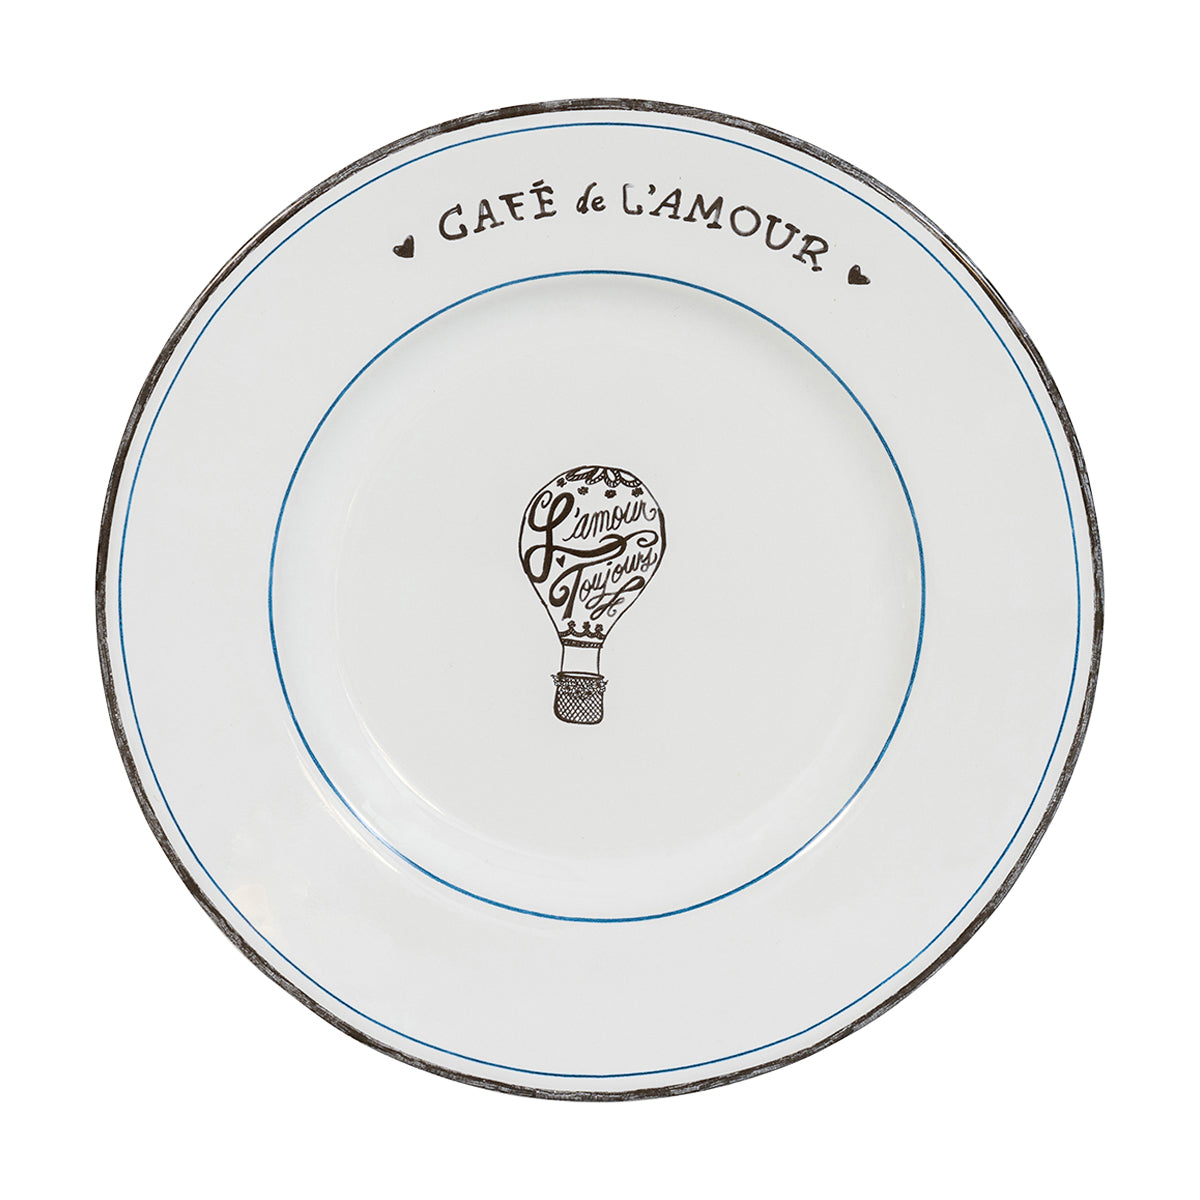 L'Amour Toujours Dinner Plate Set-4-2nd